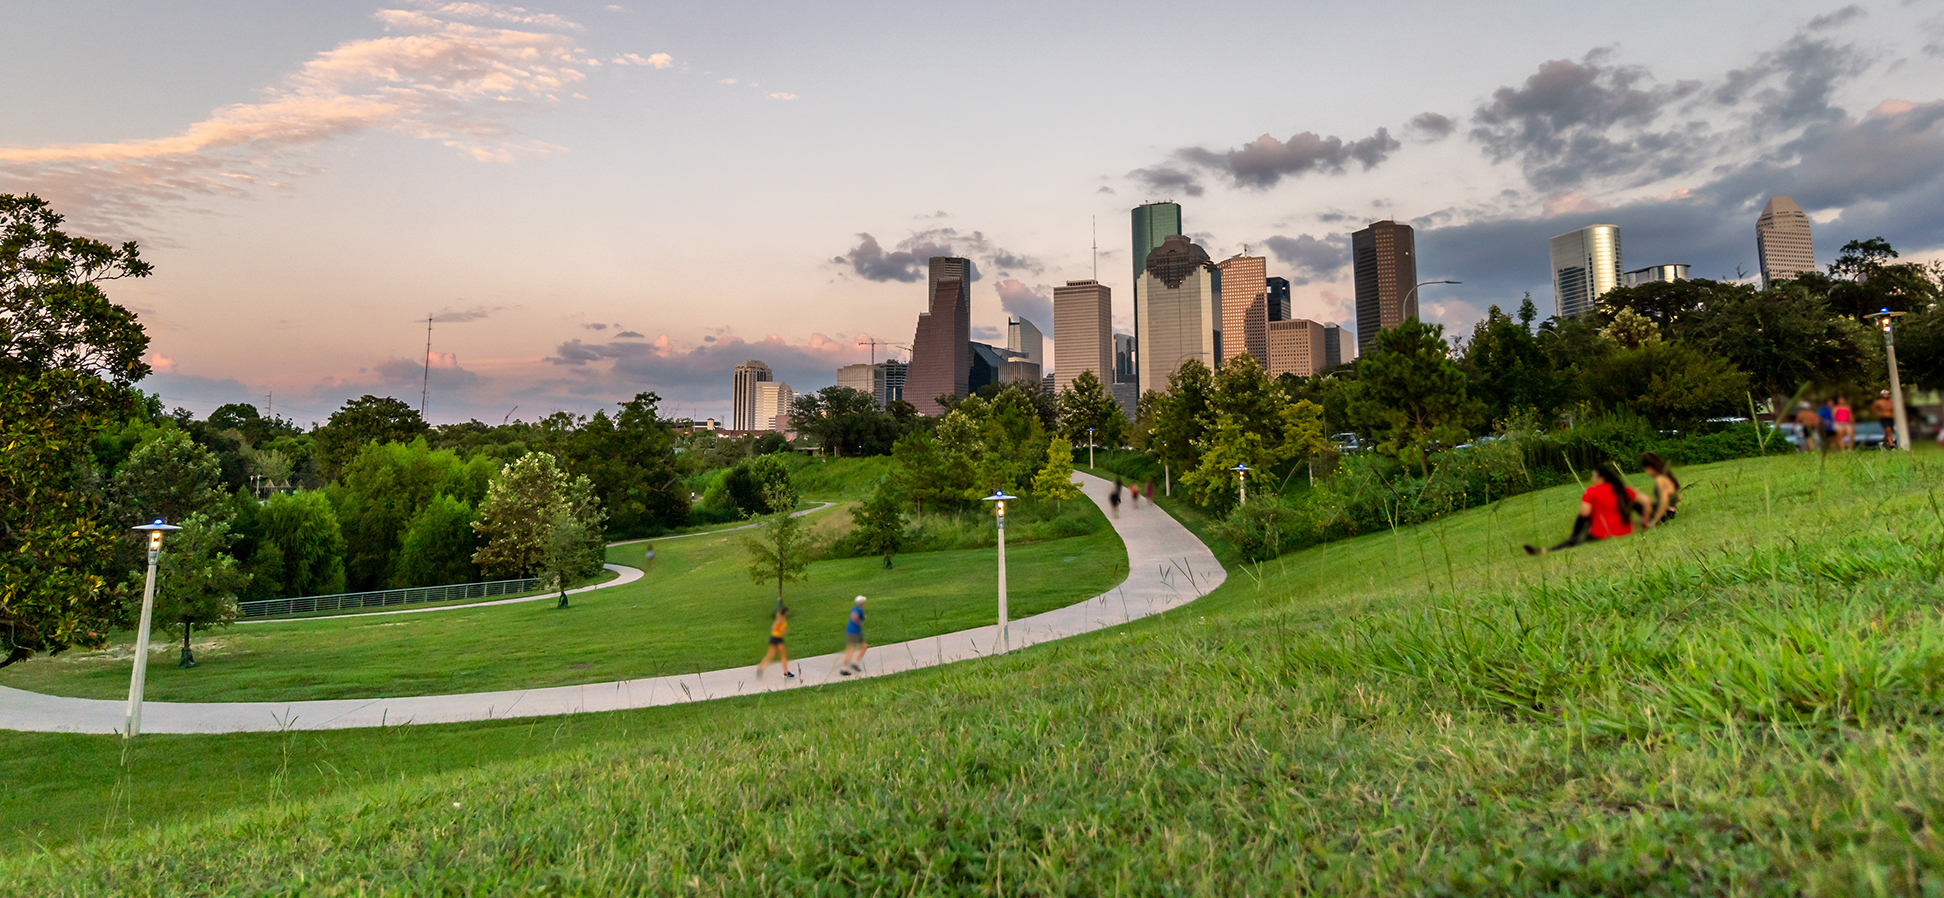 SpotHero Summer Picks: Our Top 7 Things to do in Houston This Summer